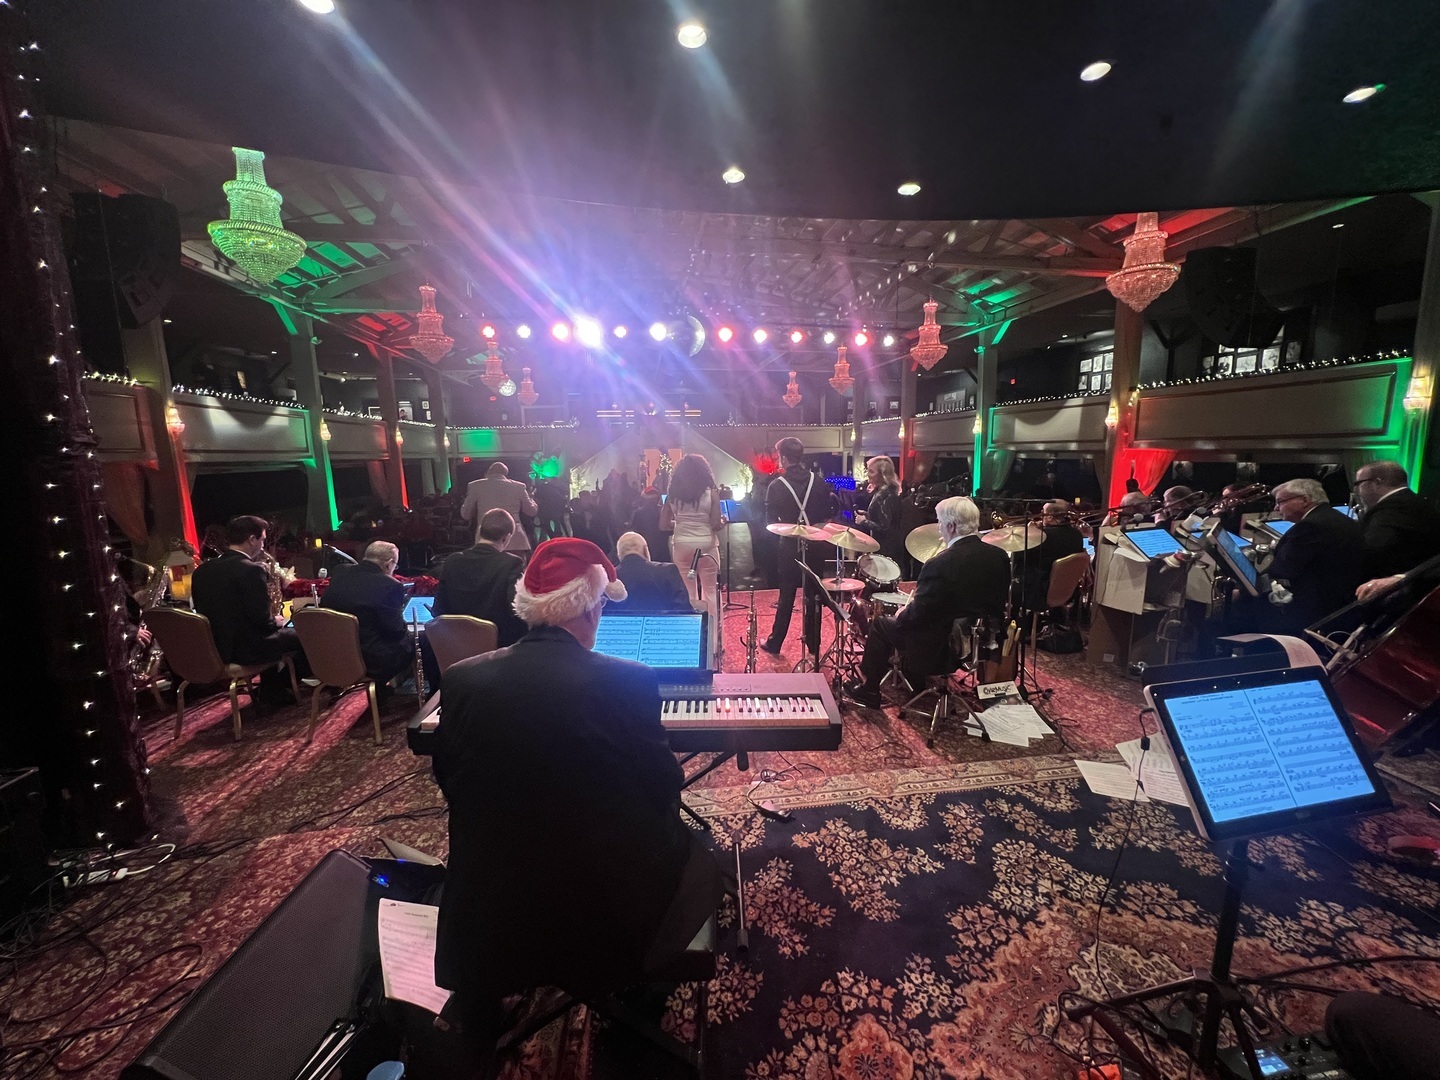 Valley Dale Ballroom's Swingin' New Year's Eve with The Rick Brunetto Big Band and THE BUCKEYE GAME., Columbus, Ohio, United States